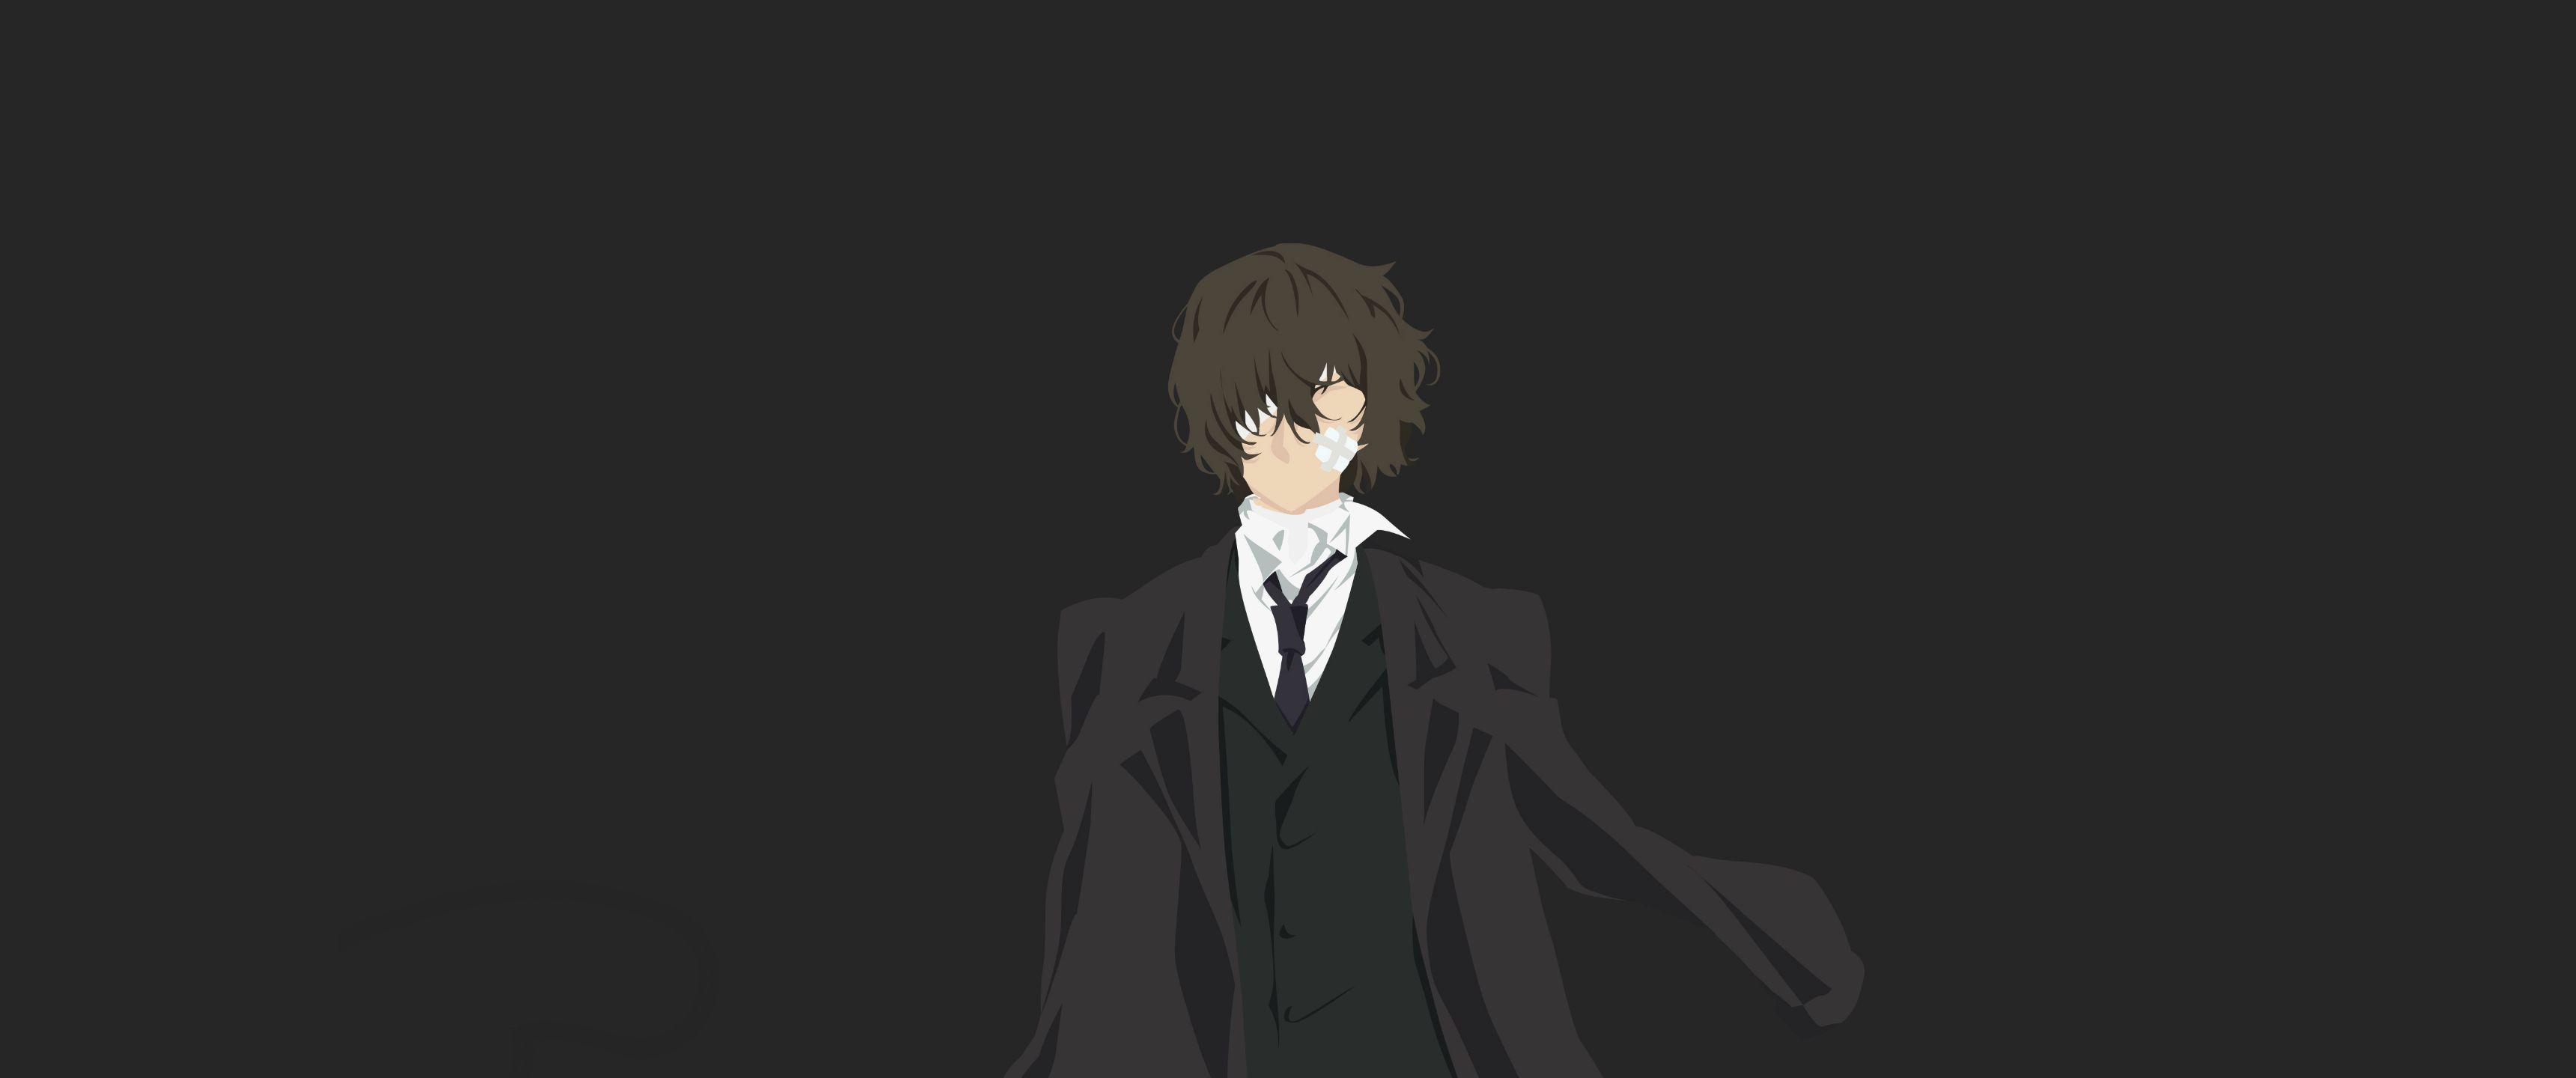 A cartoon character in black suit and tie - 3440x1440